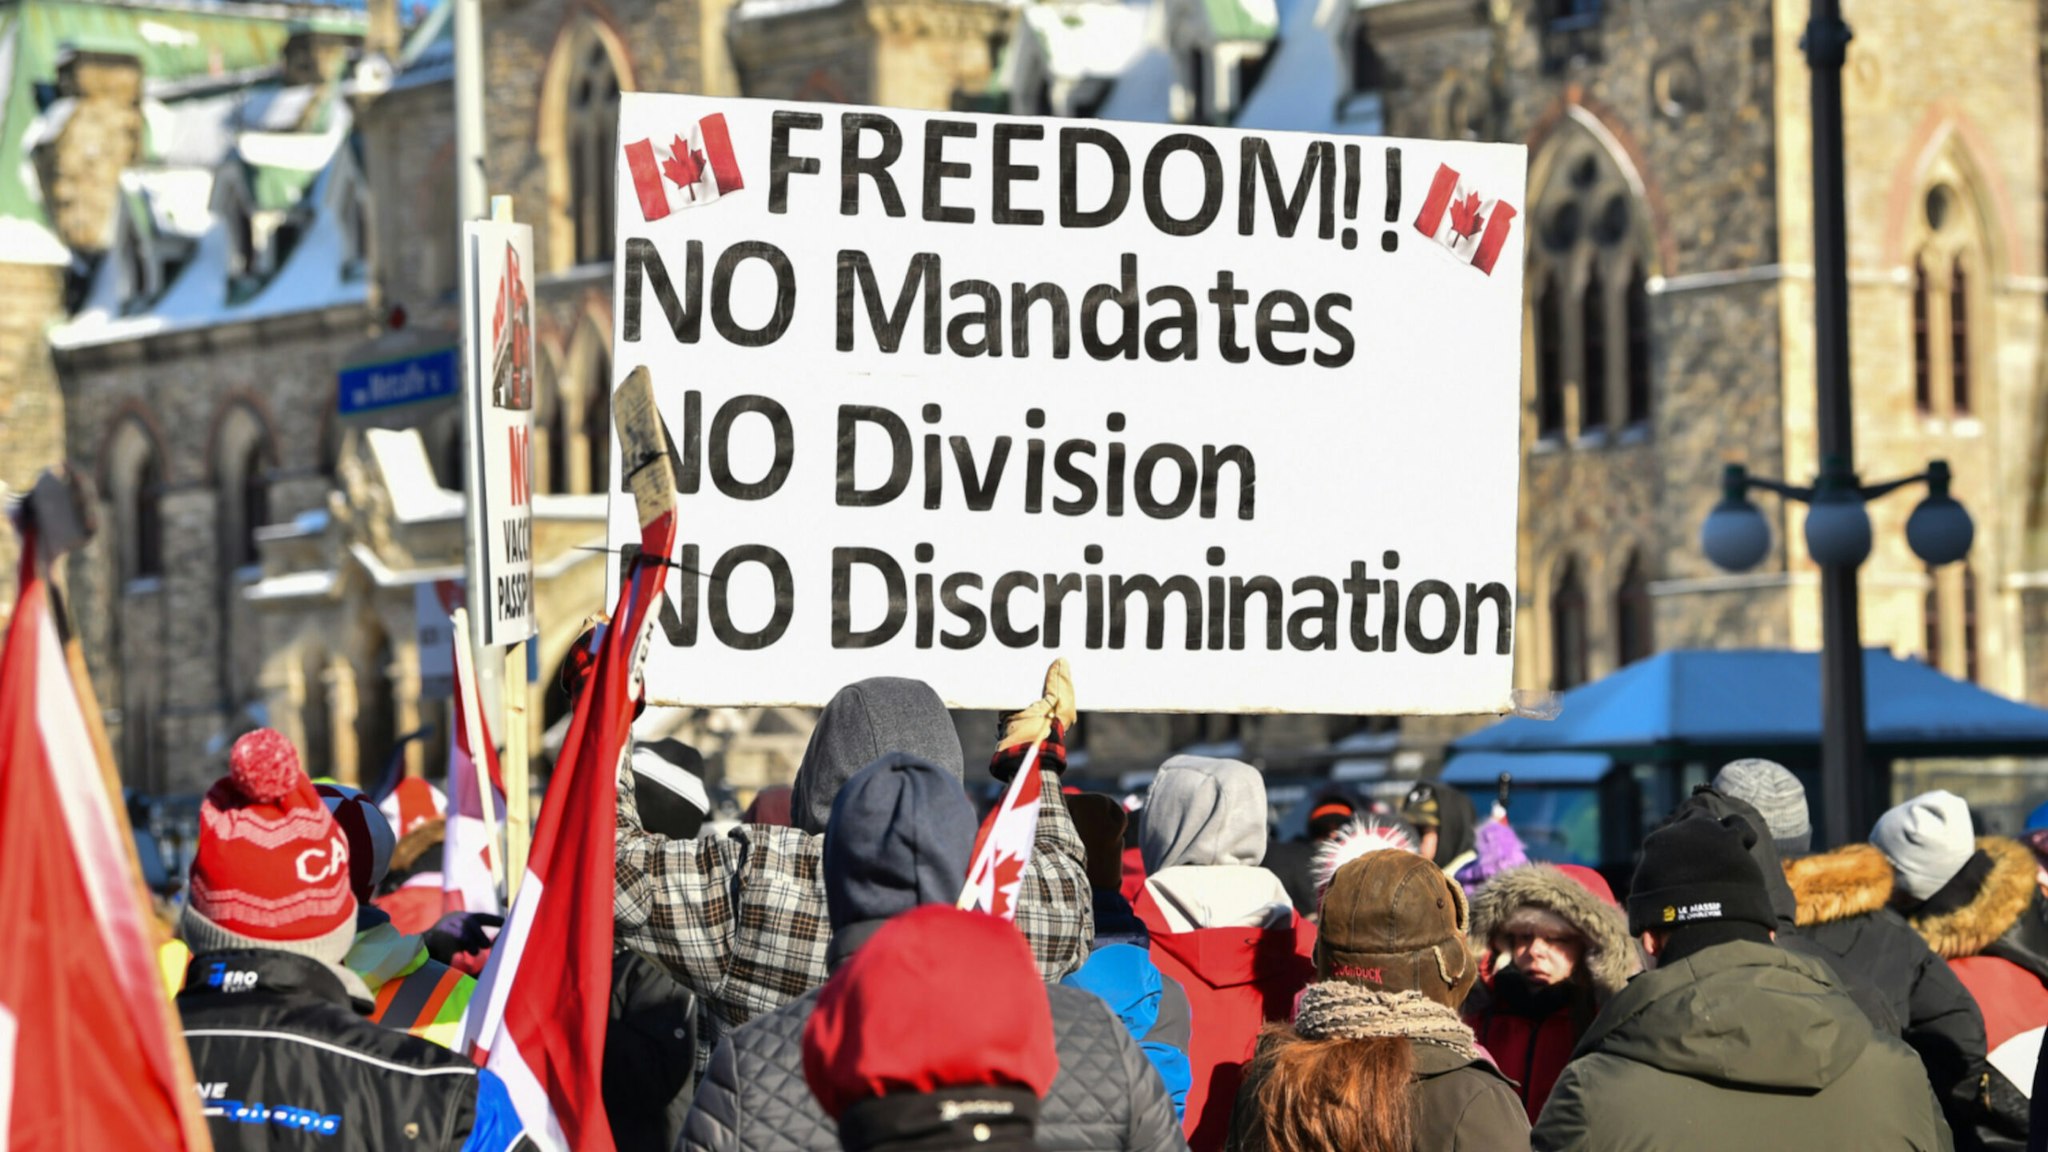 Protesters hold up a sign as they condemn the mandates imposed by the Prime Minister of Canada, Justin Trudeau near Parliament Hill on February 5, 2022 in Ottawa, Canada.